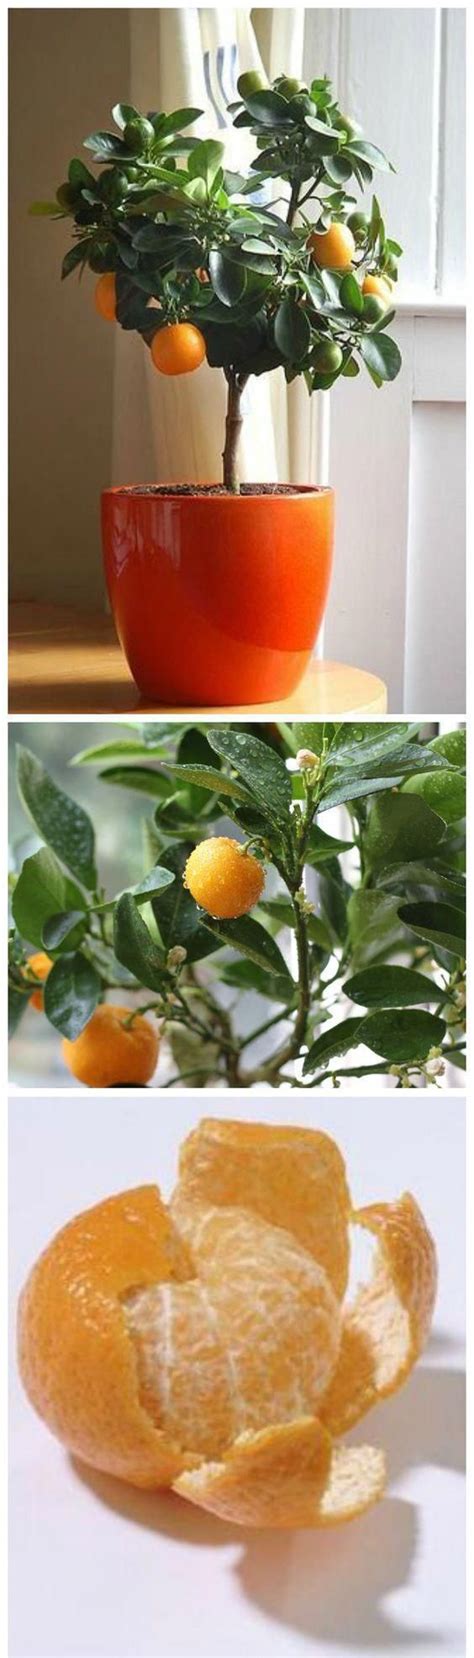 How To Grow Clementines From Seeds Clementines Are A Sweet Small